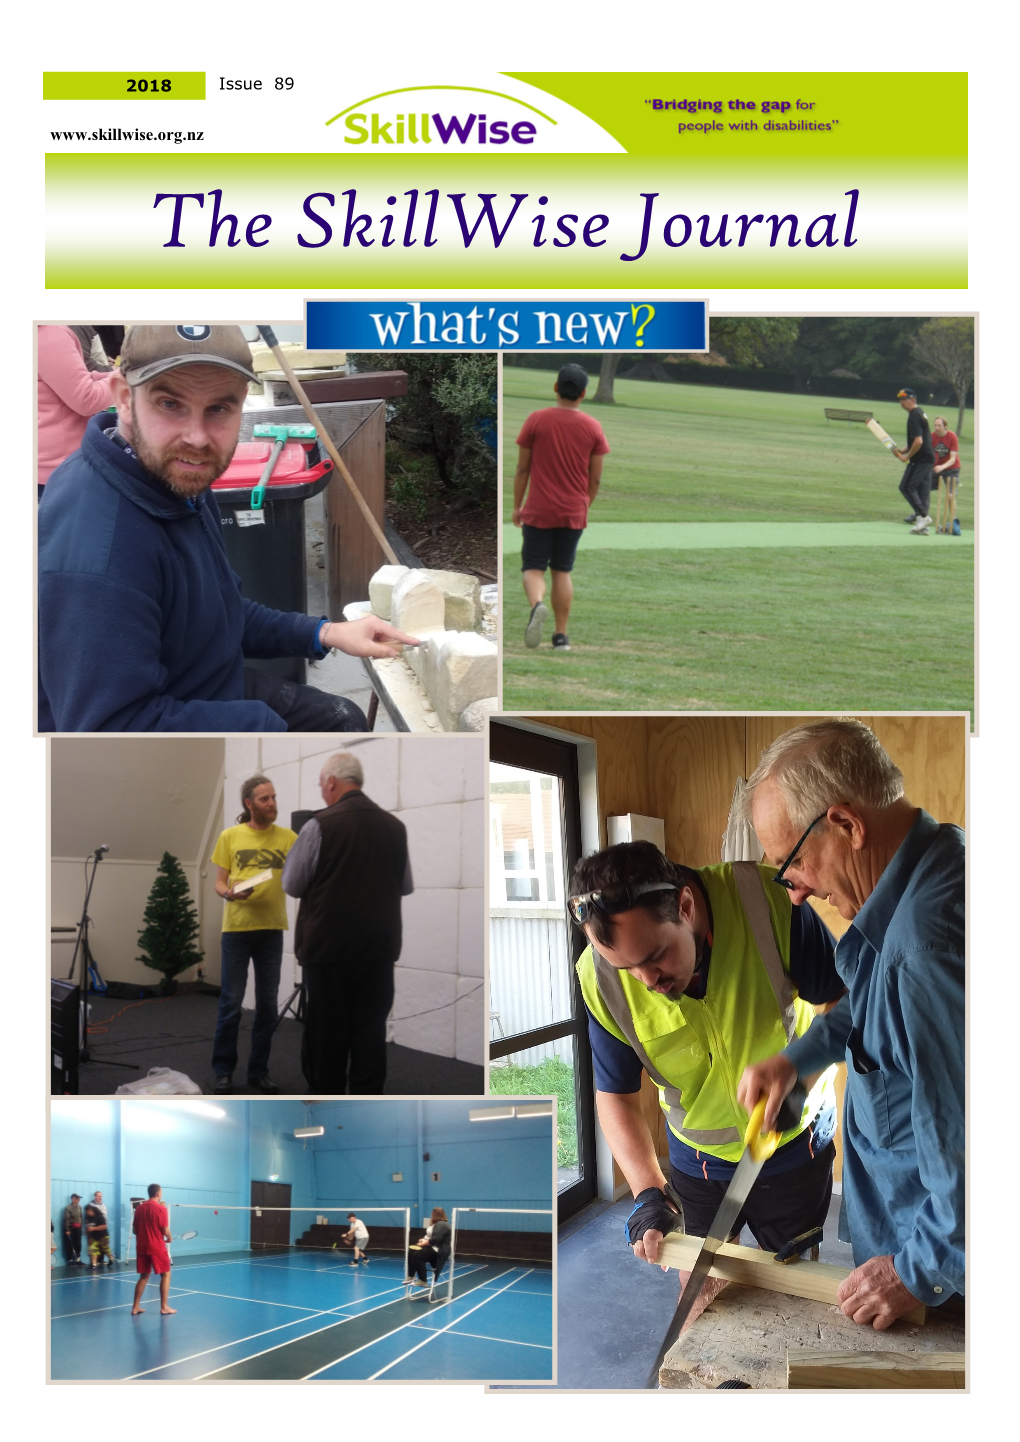 The Skillwise Journal